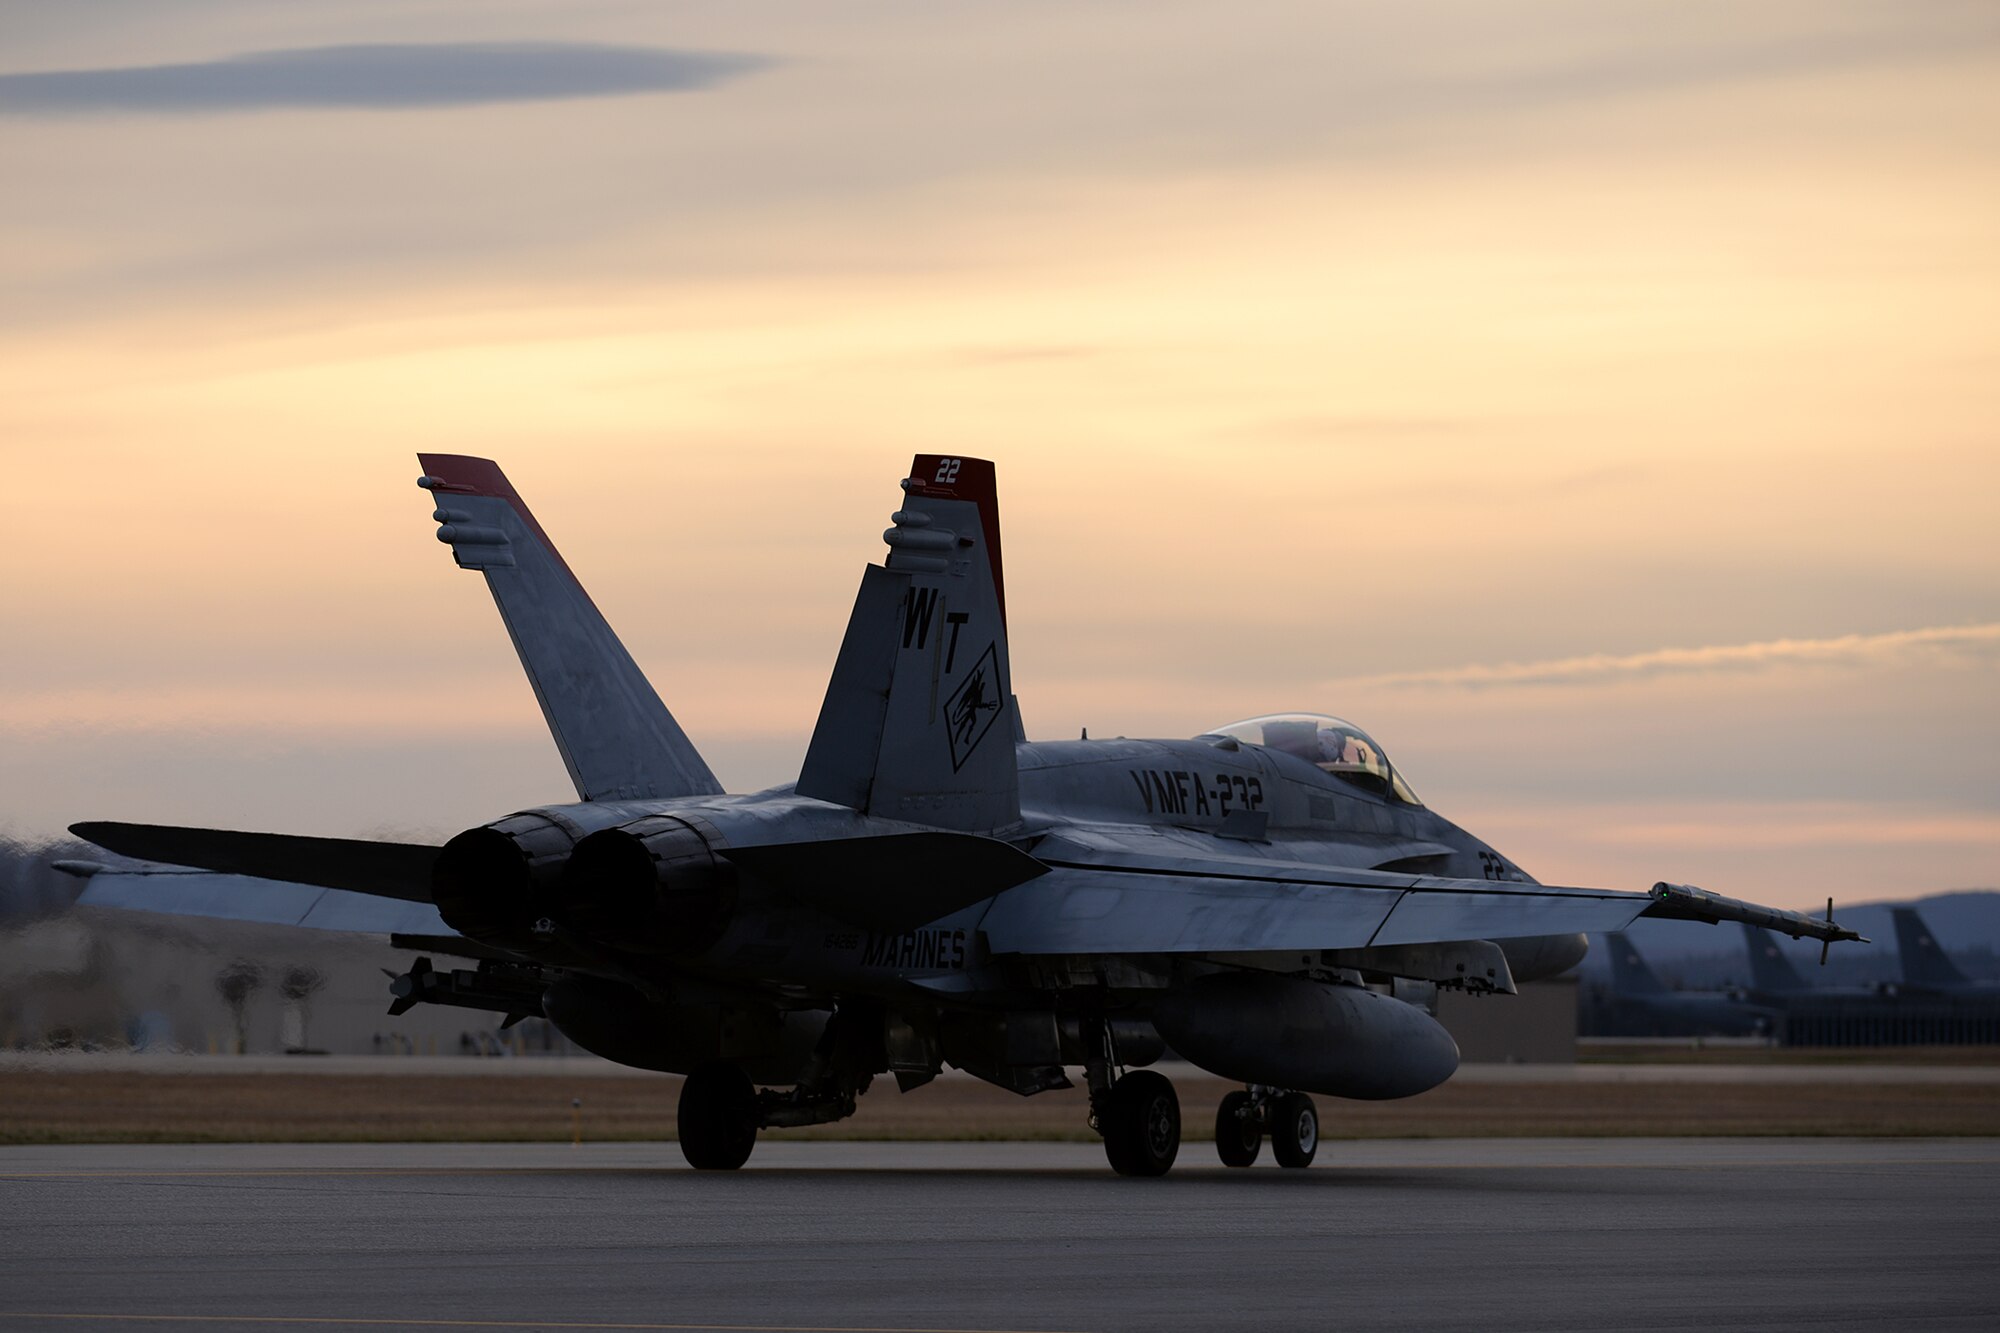 A pilot assigned to Marine Fighter Attack Squadron 232 out of Marine Corps Air Station Miramar, Calif., taxis his F/A-18C Hornet aircraft down the Eielson Air Force Base, Alaska, flight line as U.S. Air Force KC-135 Stratotanker aircraft wait in their ramp space in the background Oct. 10, 2016, during RED FLAG-Alaska (RF-A) 17-1. The Joint Pacific Alaska Range Complex provides more than 67,000 square miles of realistic training environment and allows commanders to train for full spectrum engagements, ranging from individual skills to complex, large-scale joint engagements. (U.S. Air Force photo by Master Sgt. Karen J. Tomasik)